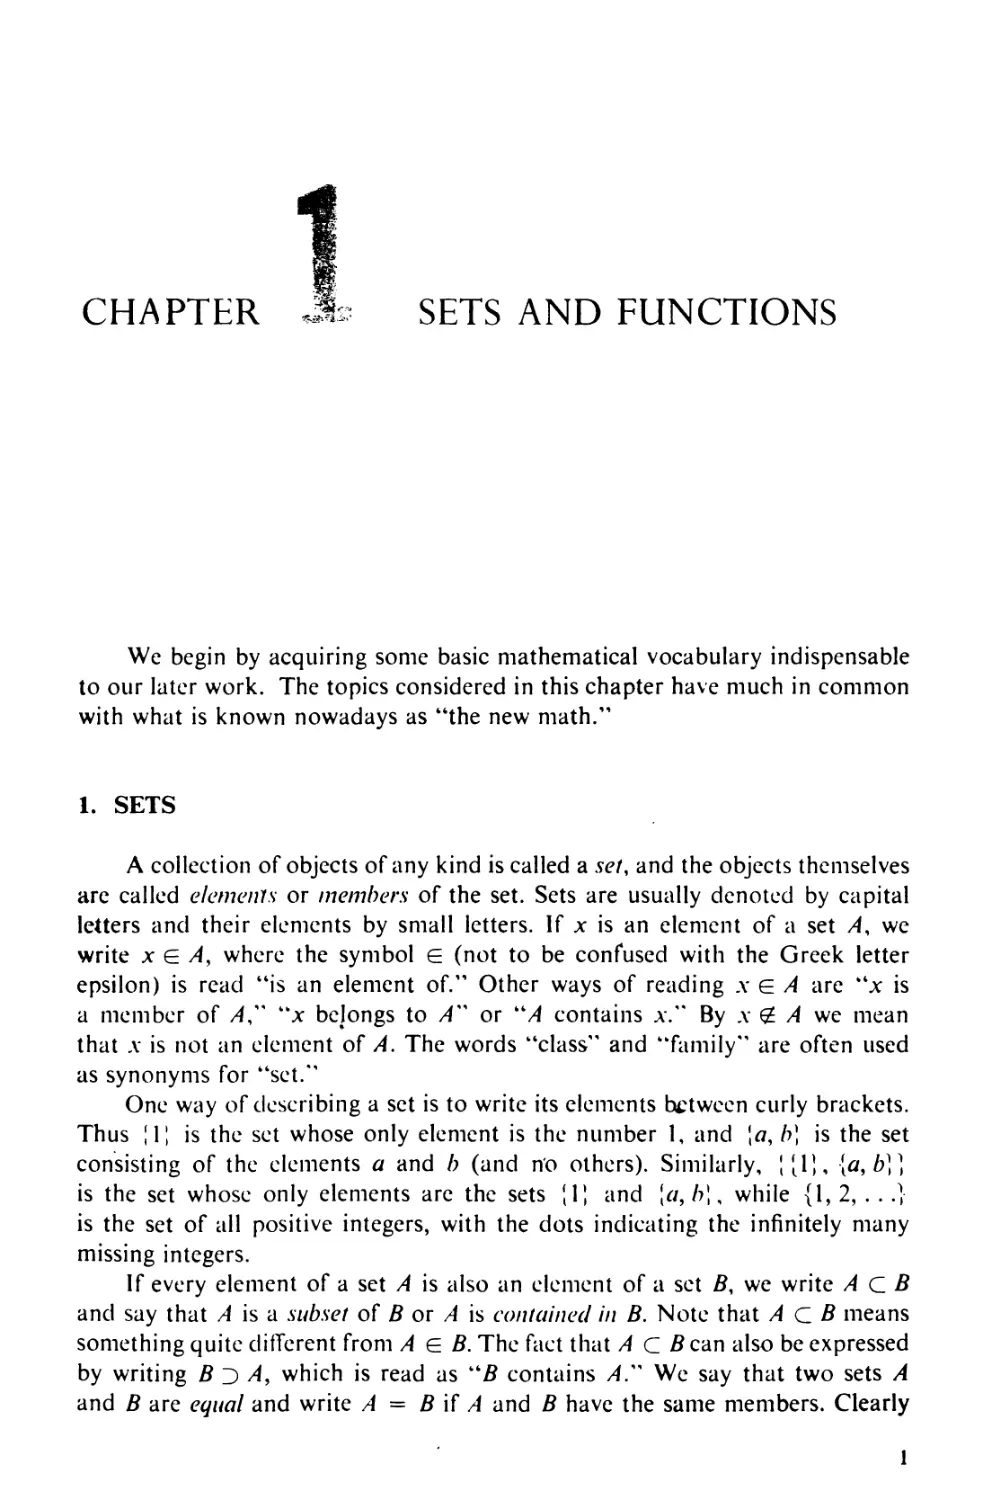 CHAPTER 1 SETS AND FUNCTIONS